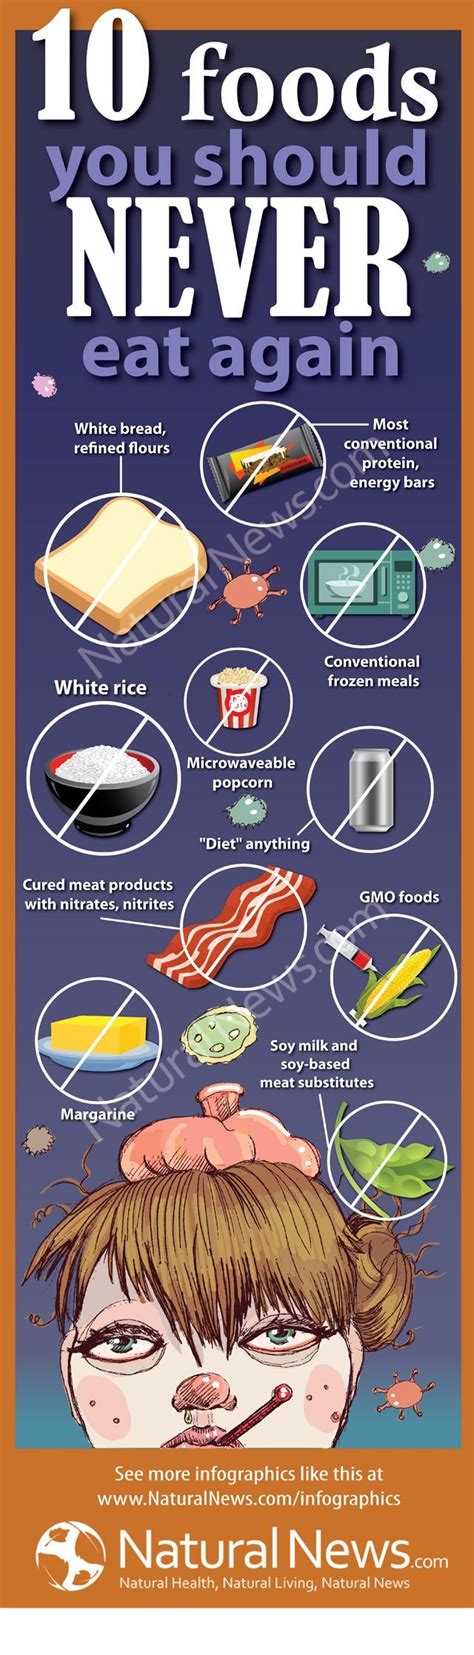 Foods You Should Never Eat Again Infographic